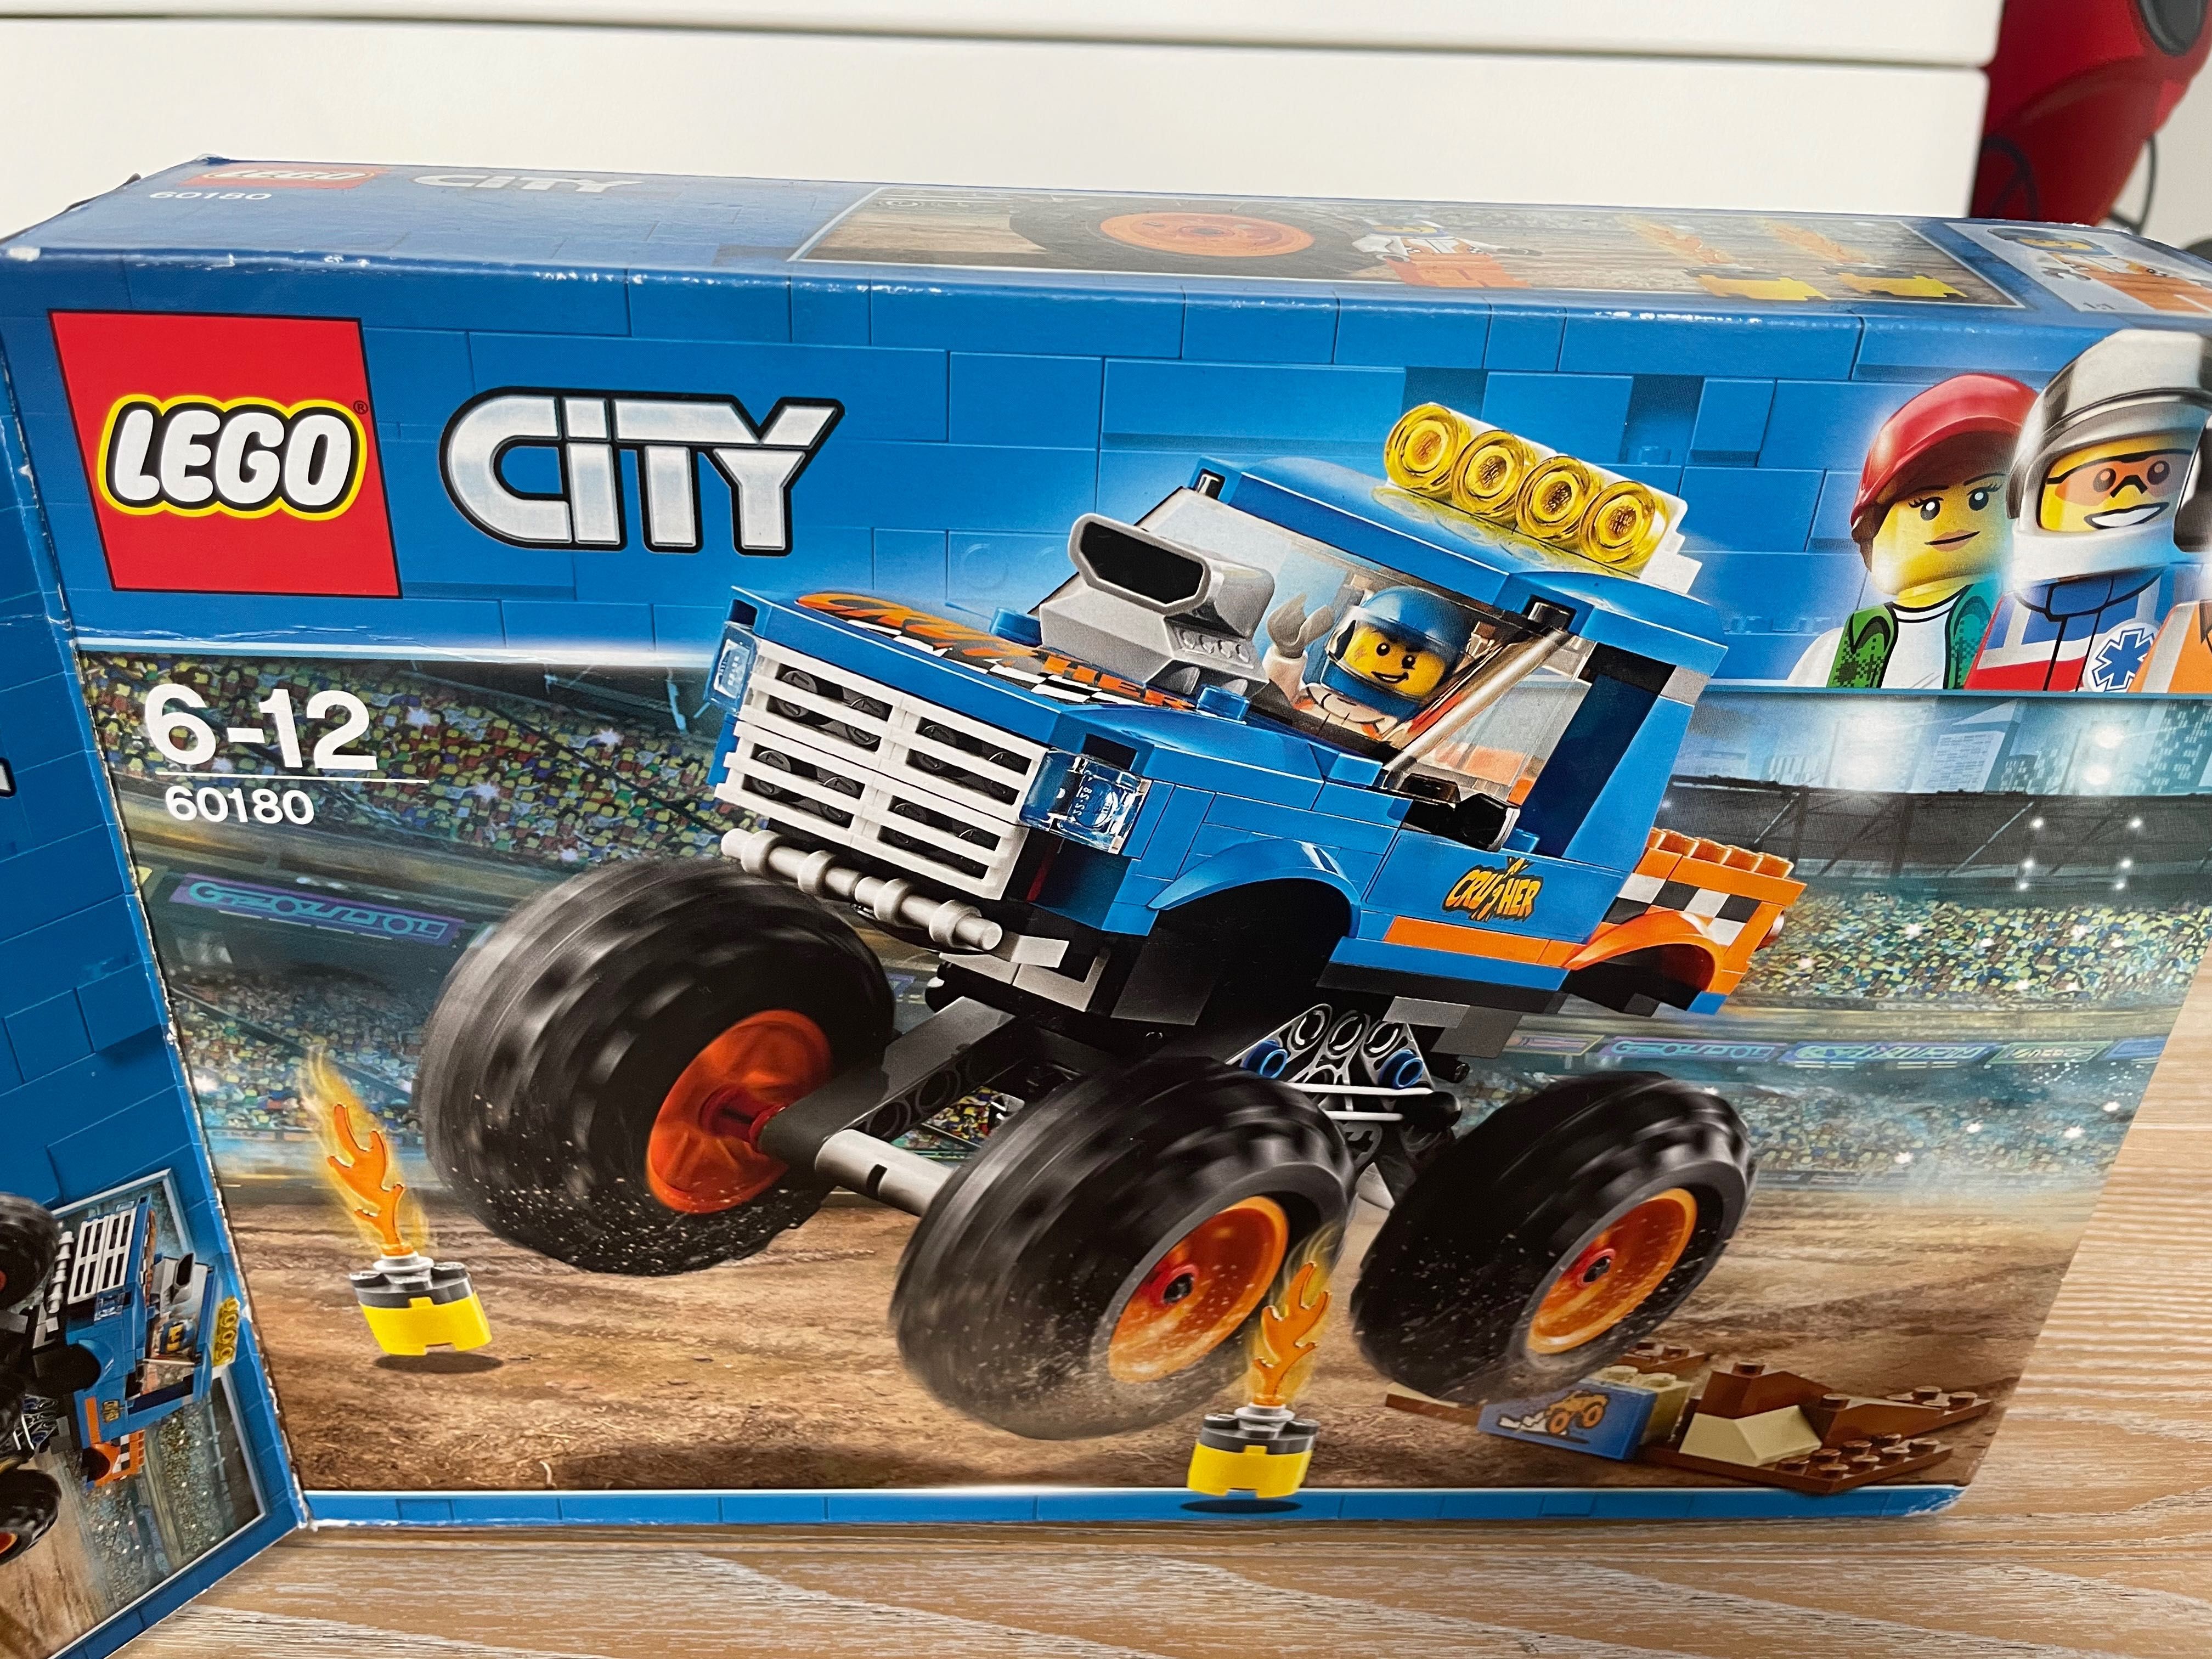 Lego City 60180 Moster Truck